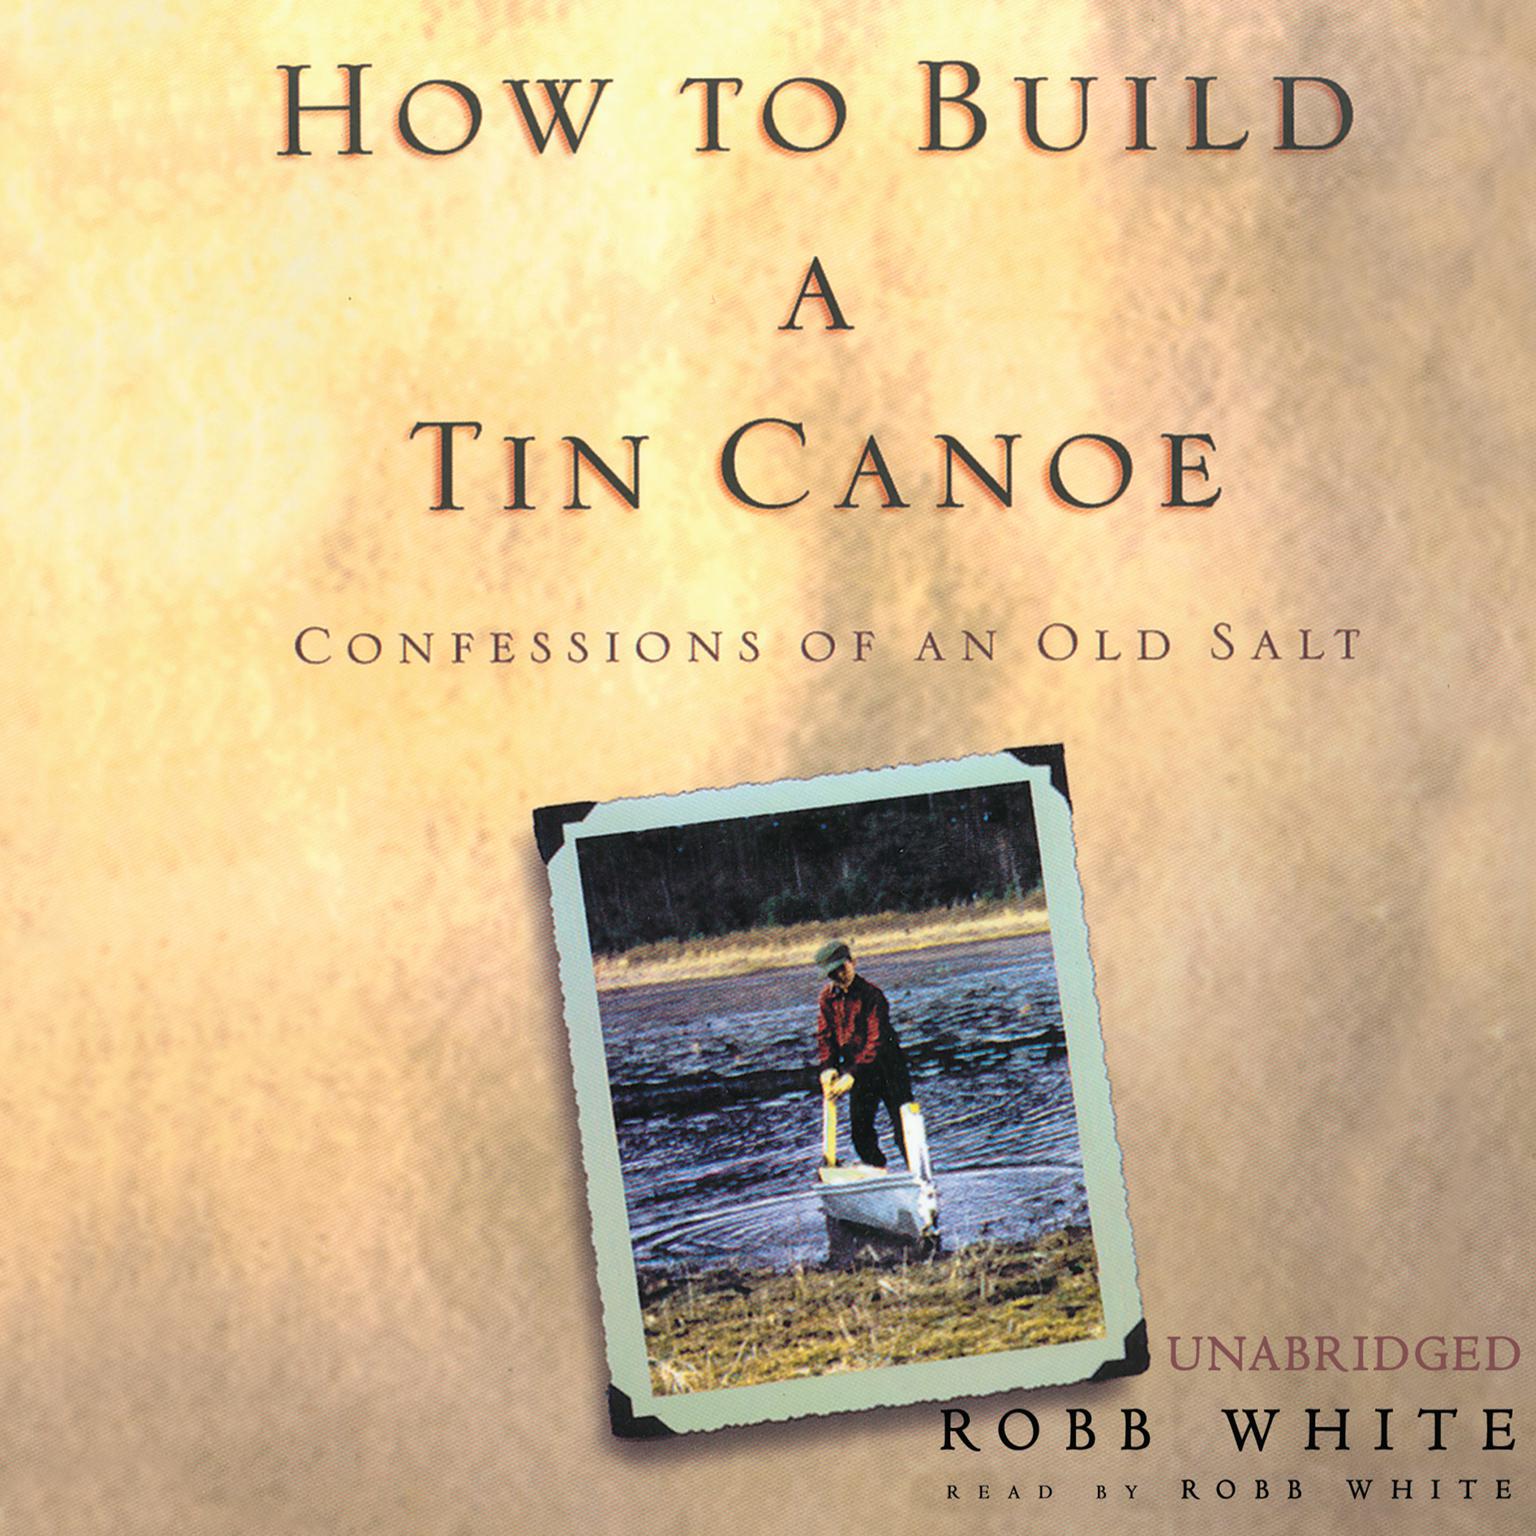 How to Build a Tin Canoe: Confessions of an Old Salt Audiobook, by Robb White